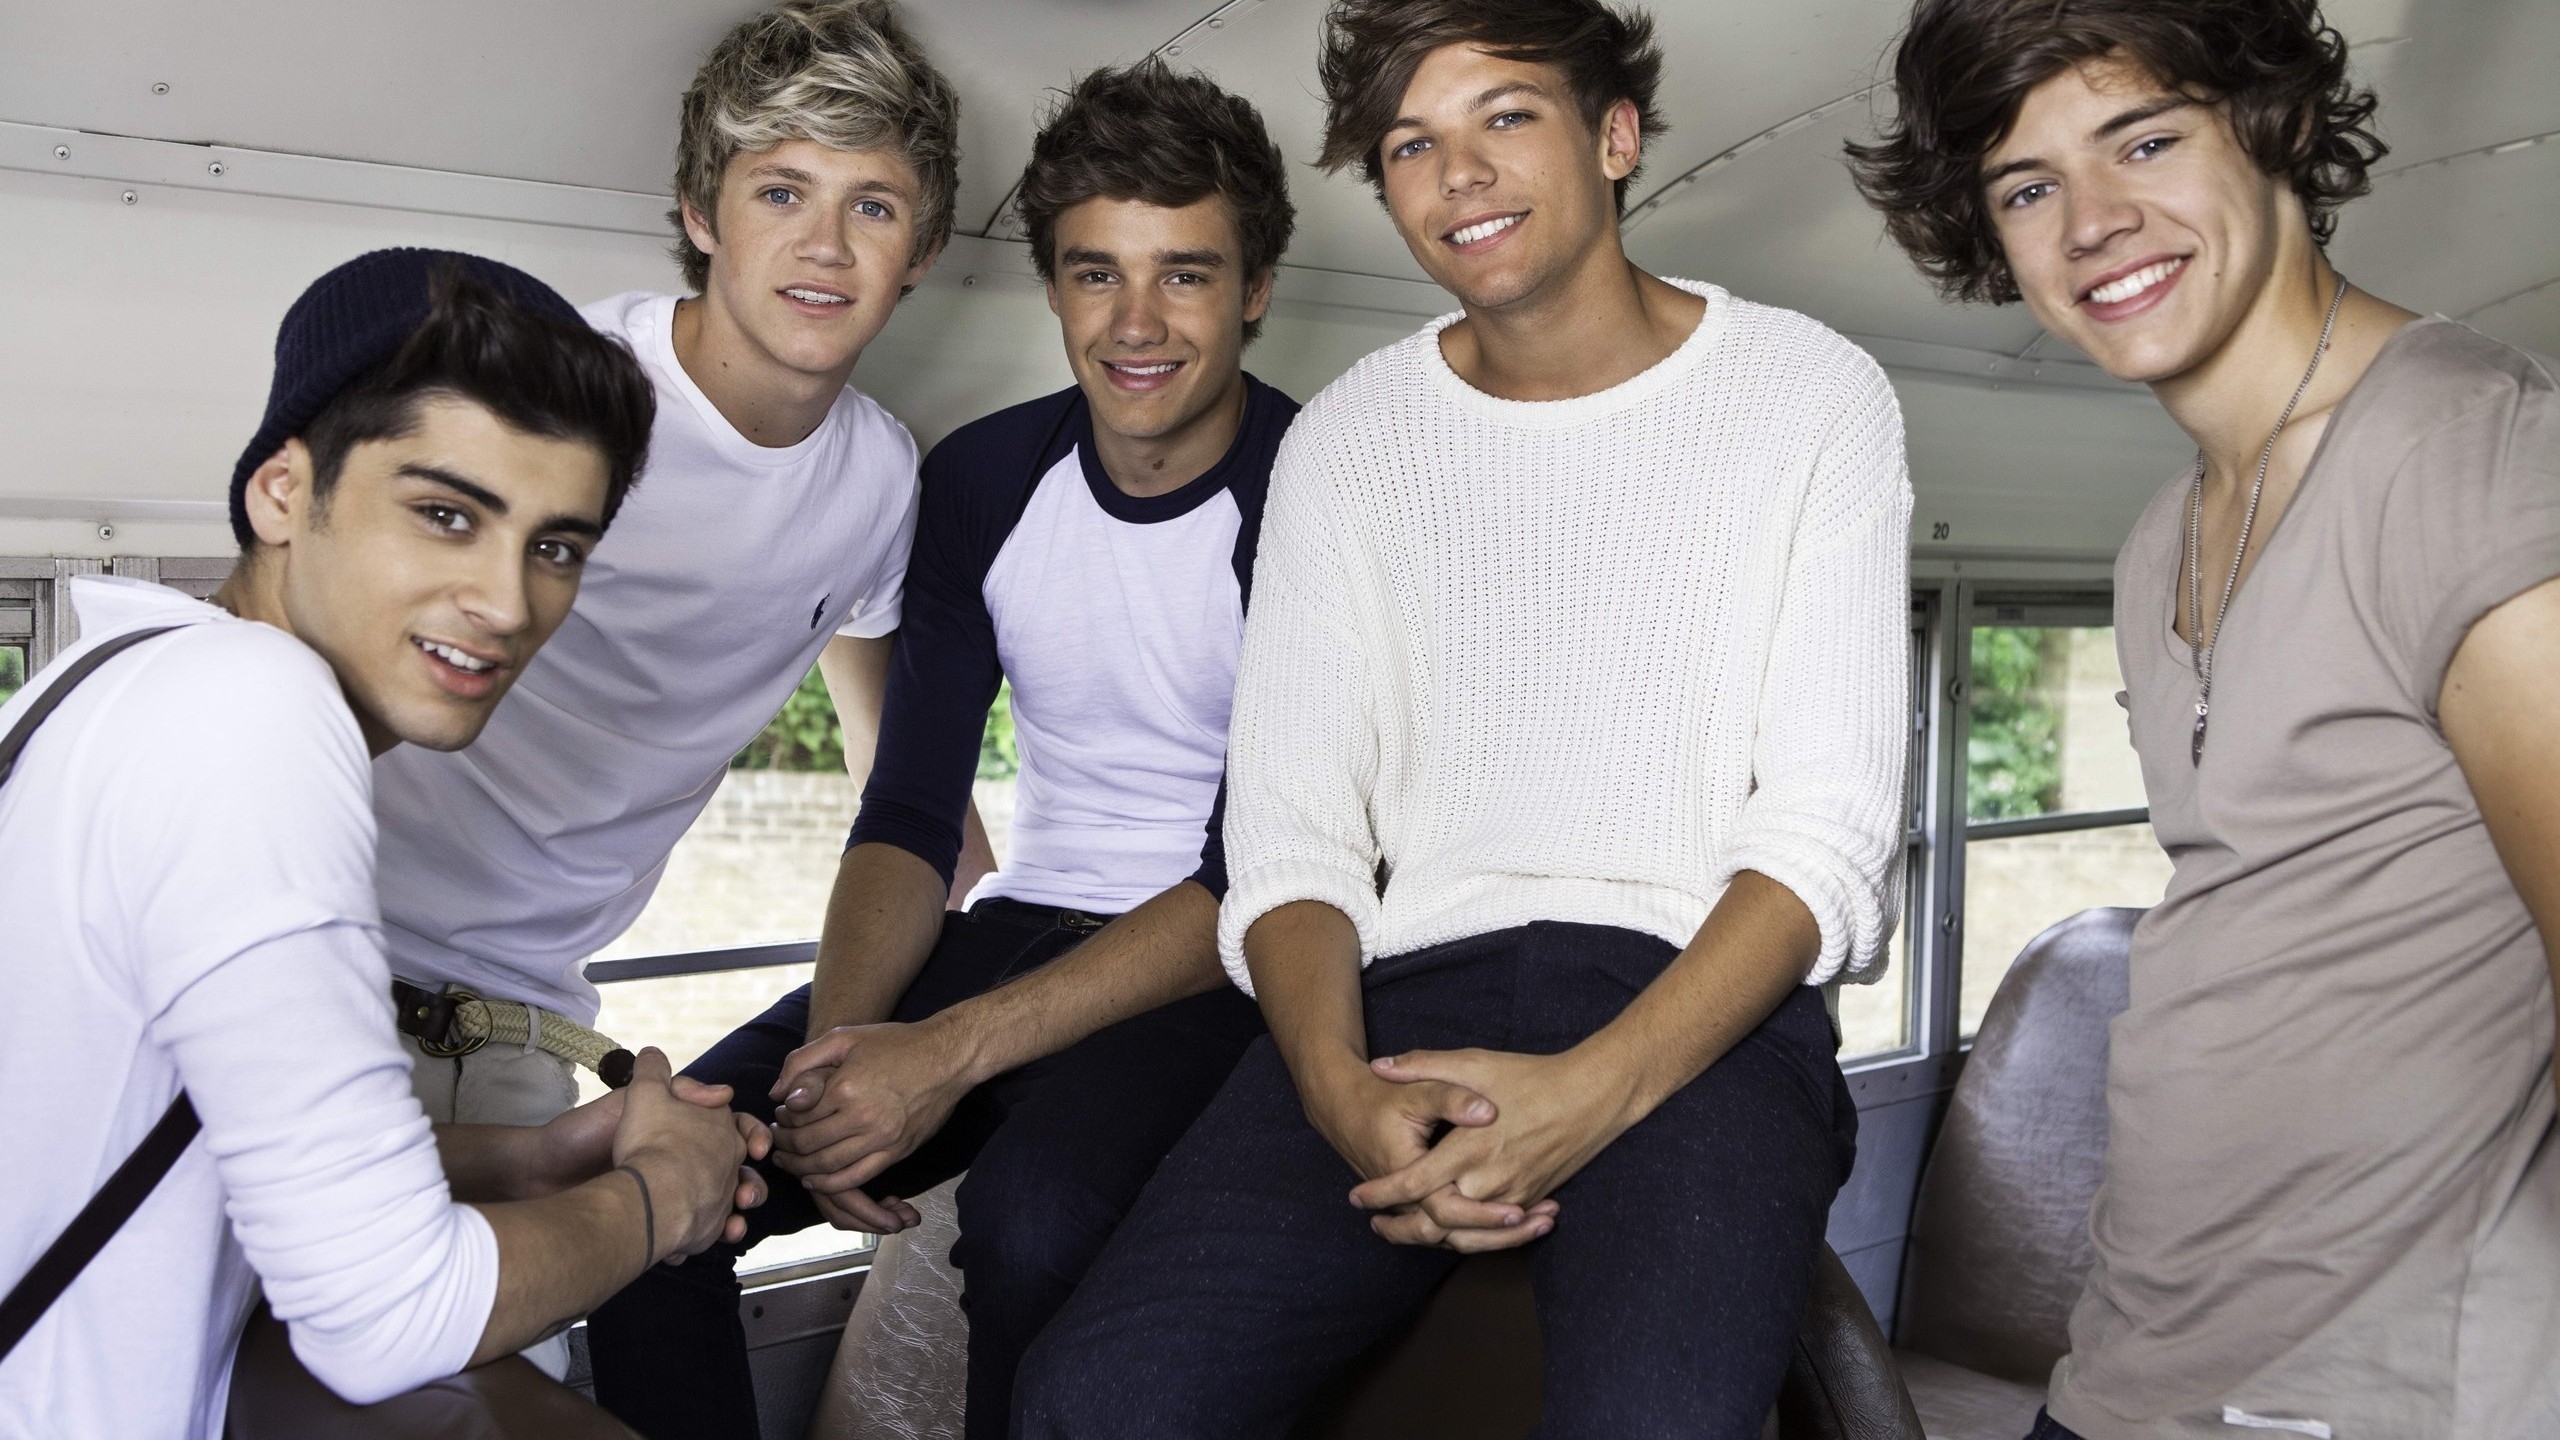 One Direction Smiling for 2560x1440 HDTV resolution